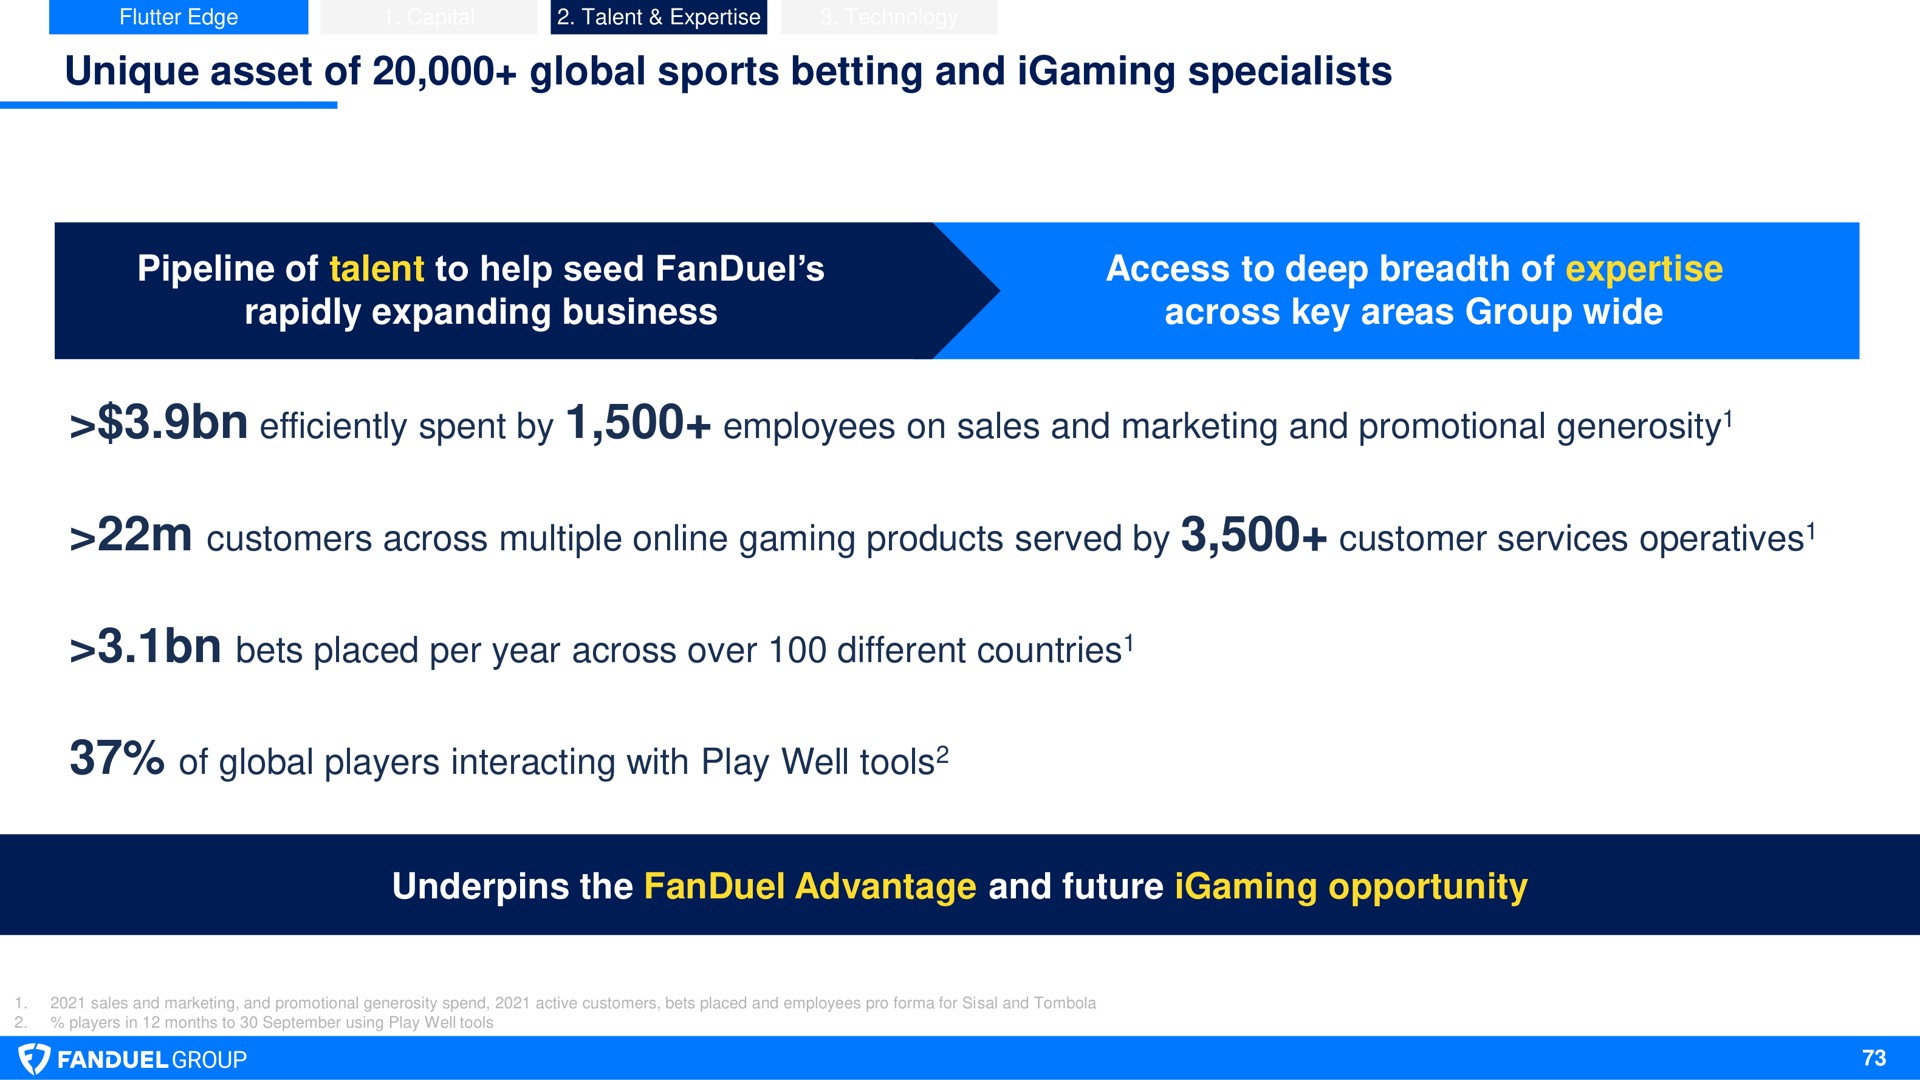 unique asset of global sports betting and specialists pipeline of talent to help seed rapidly expanding business pipeline of experts to seed rapid scaling of teams access to deep breadth of across key areas group wide efficiently spent by employees on sales and marketing and promotional generosity customers across multiple gaming products served by customer services operatives bets placed per year across over different countries of global players interacting with play well tools underpins the advantage and future opportunity generosity operatives tools | Flutter